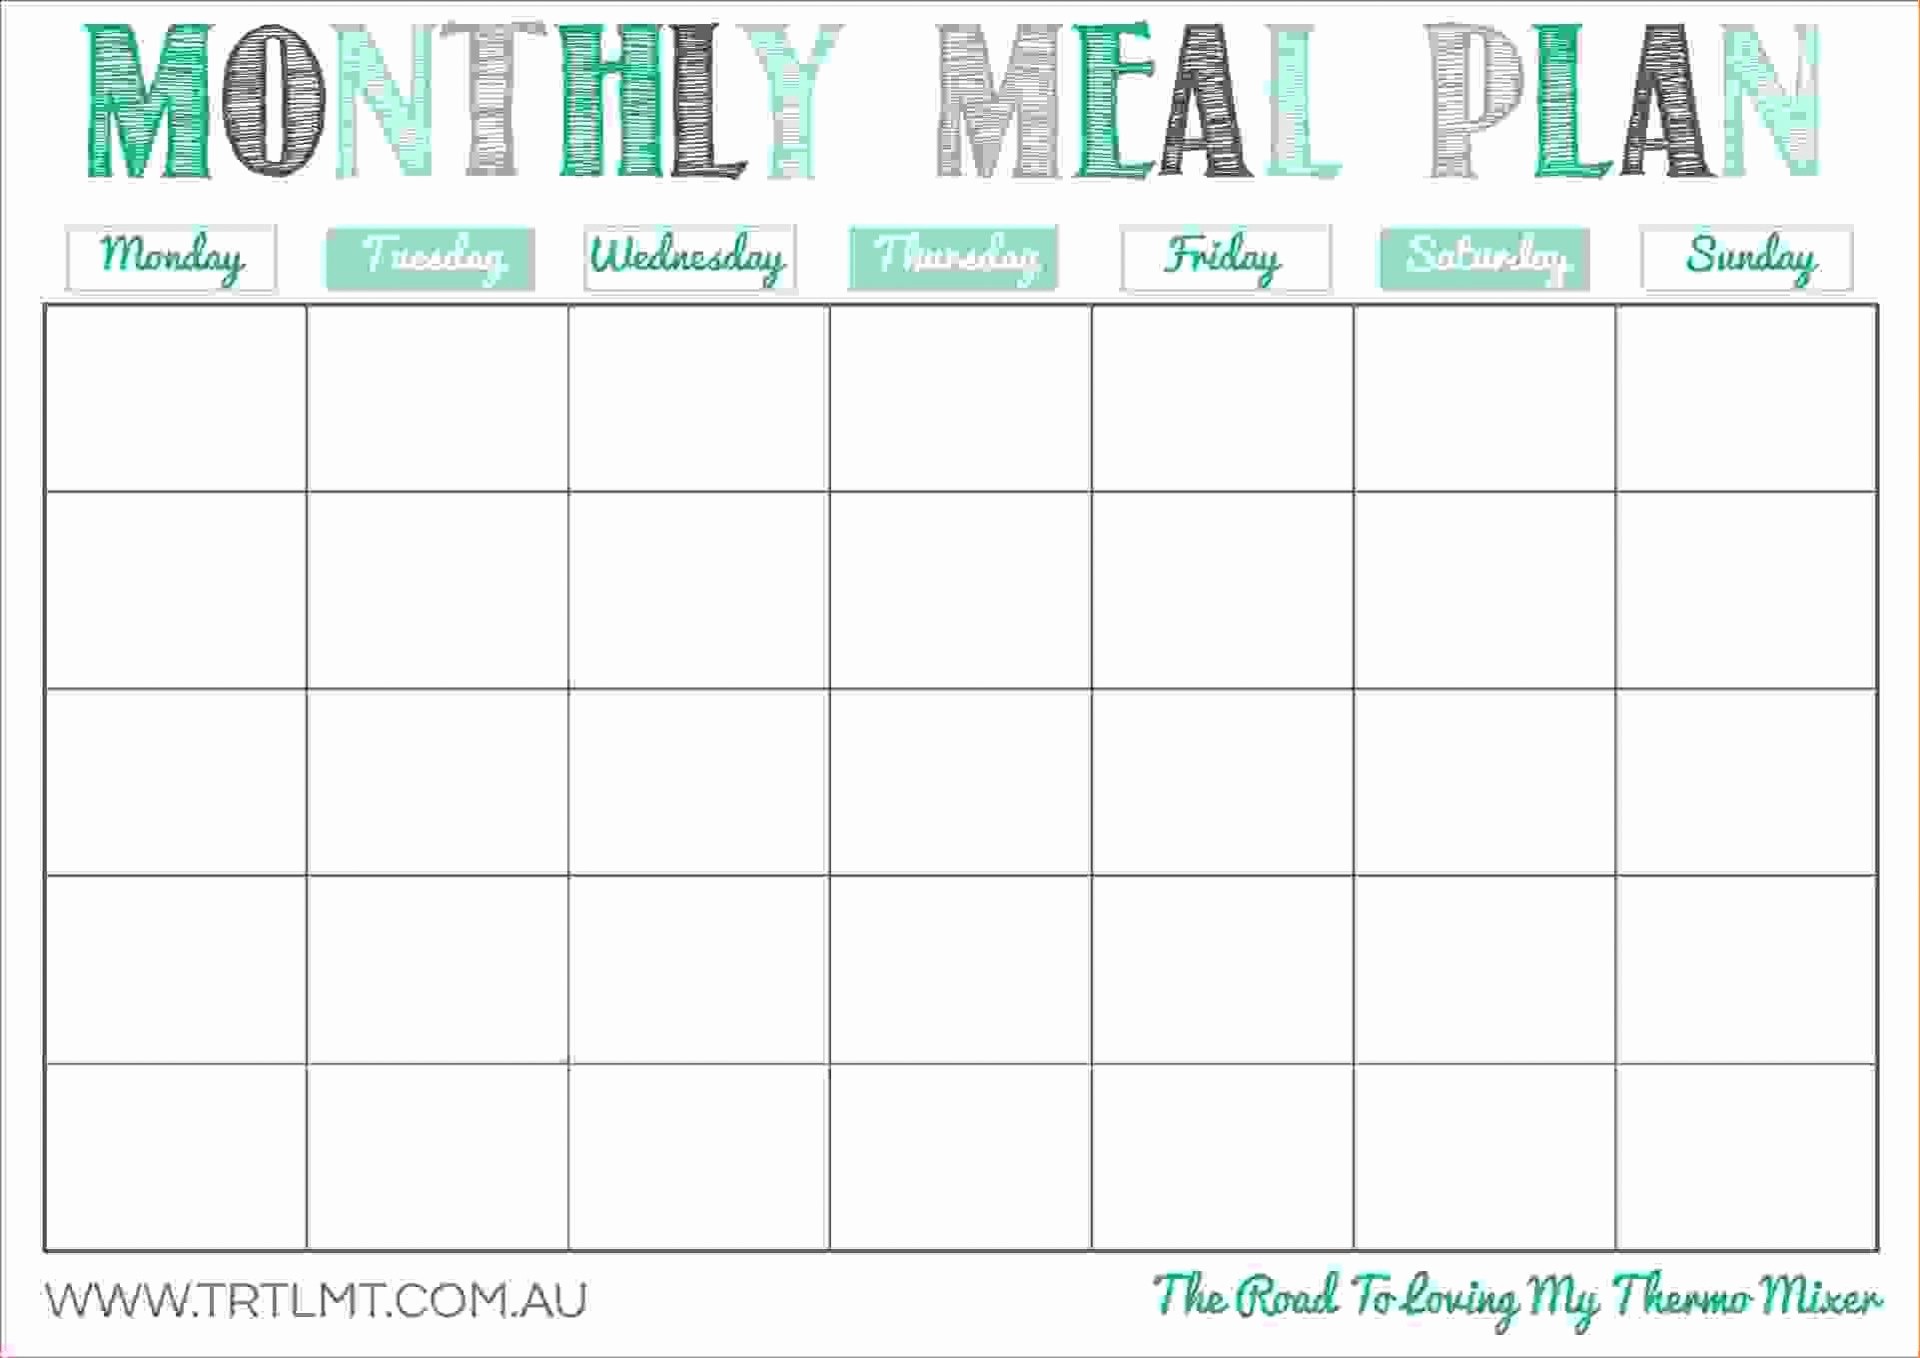 Weekly Meal Planner Excel Luxury 21 Day Fix Plan Template